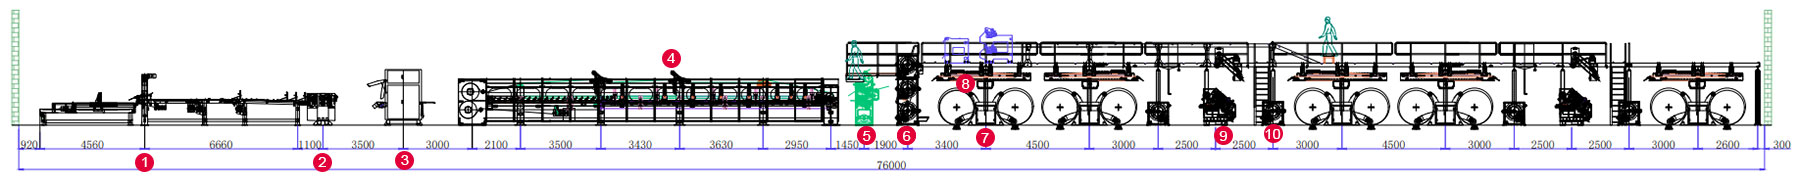 Layout of 5-ply Corrugated Cardboard Production Line